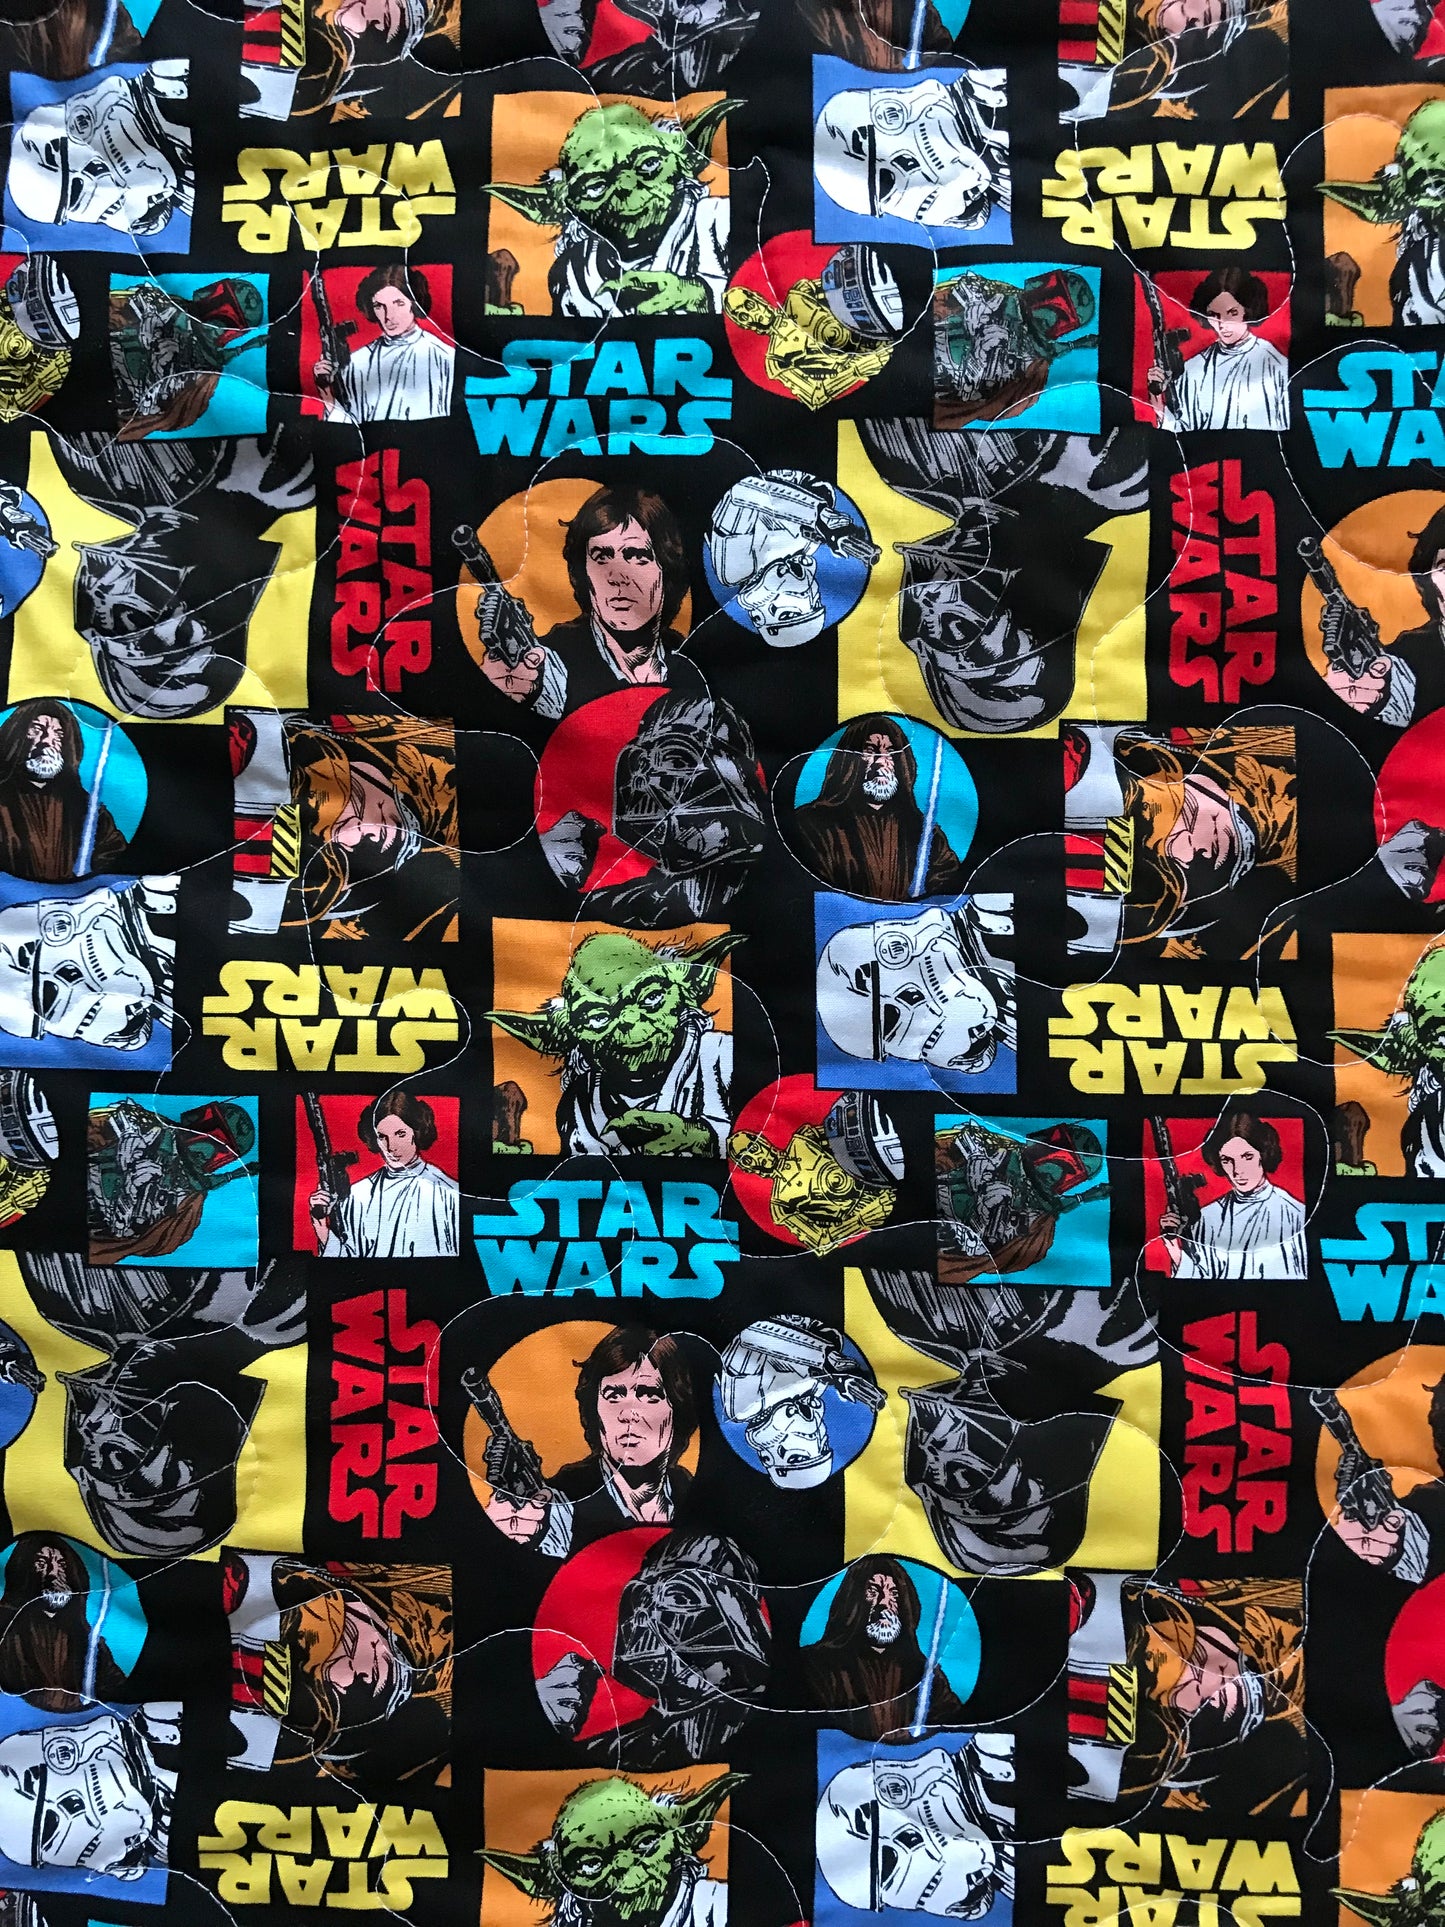 STAR WARS HAN SOLO INSPIRED QUILTED BLANKET